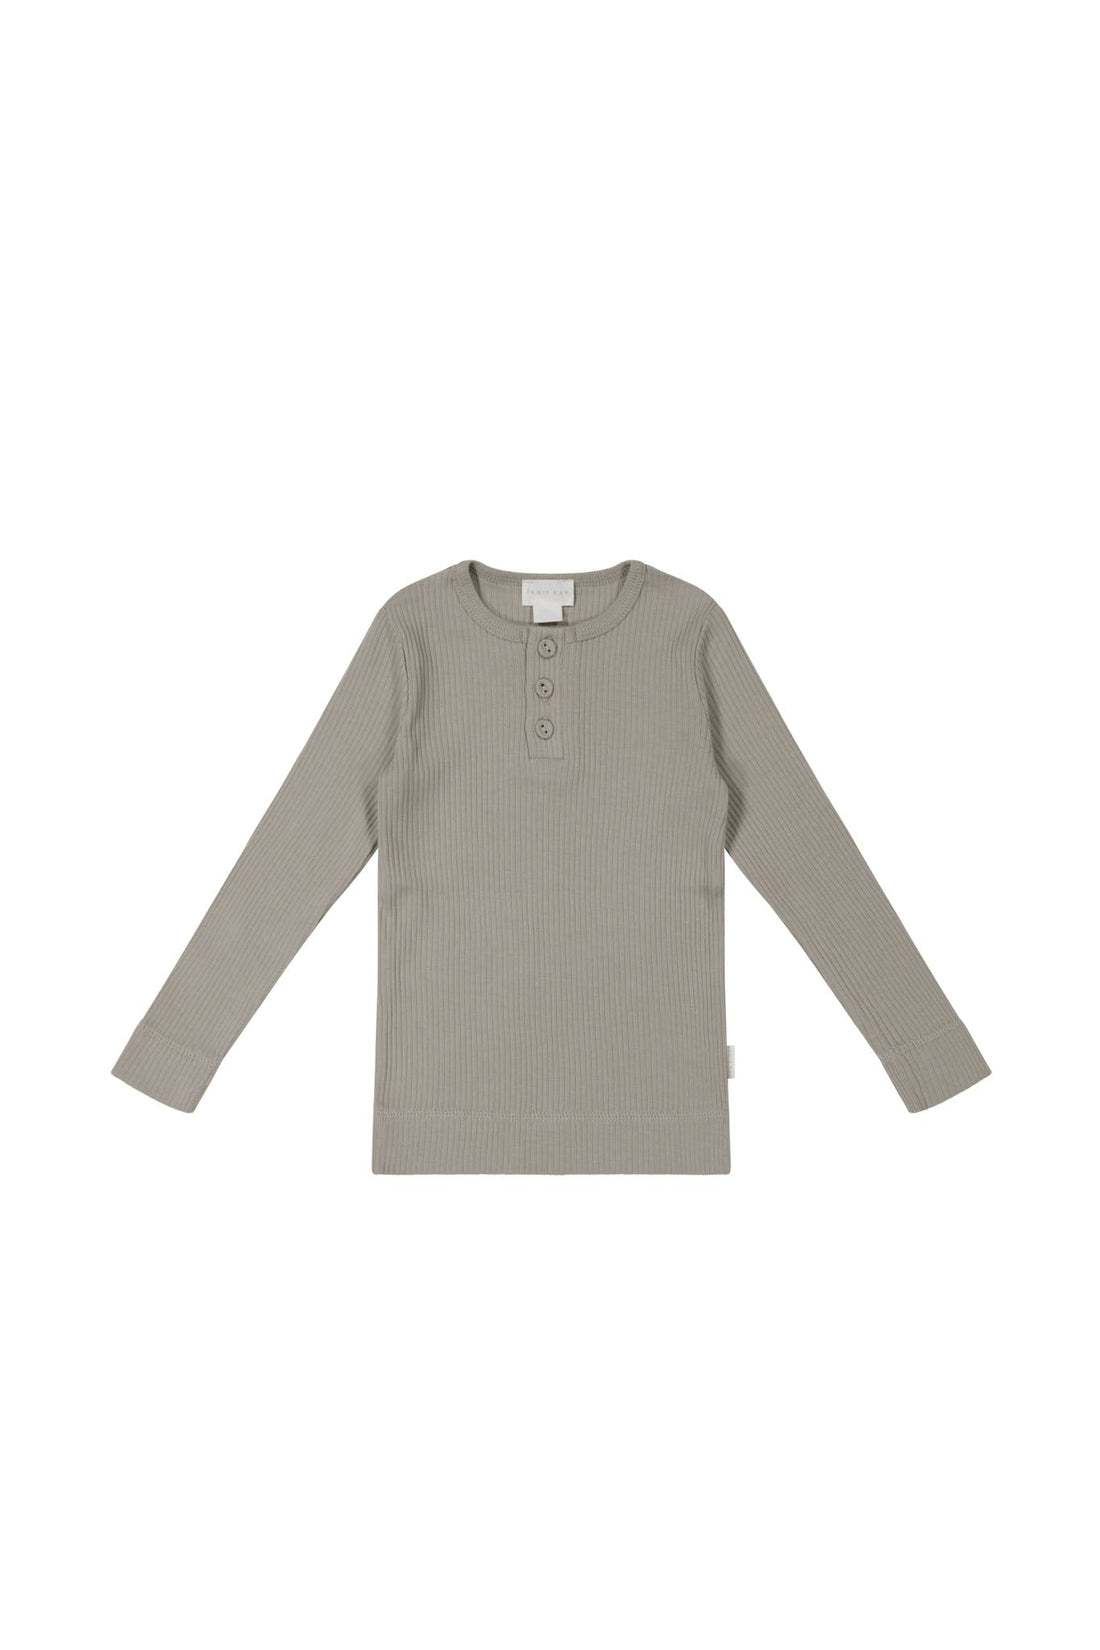 Organic Cotton Modal Long Sleeve Henley - Milford Childrens Top from Jamie Kay USA